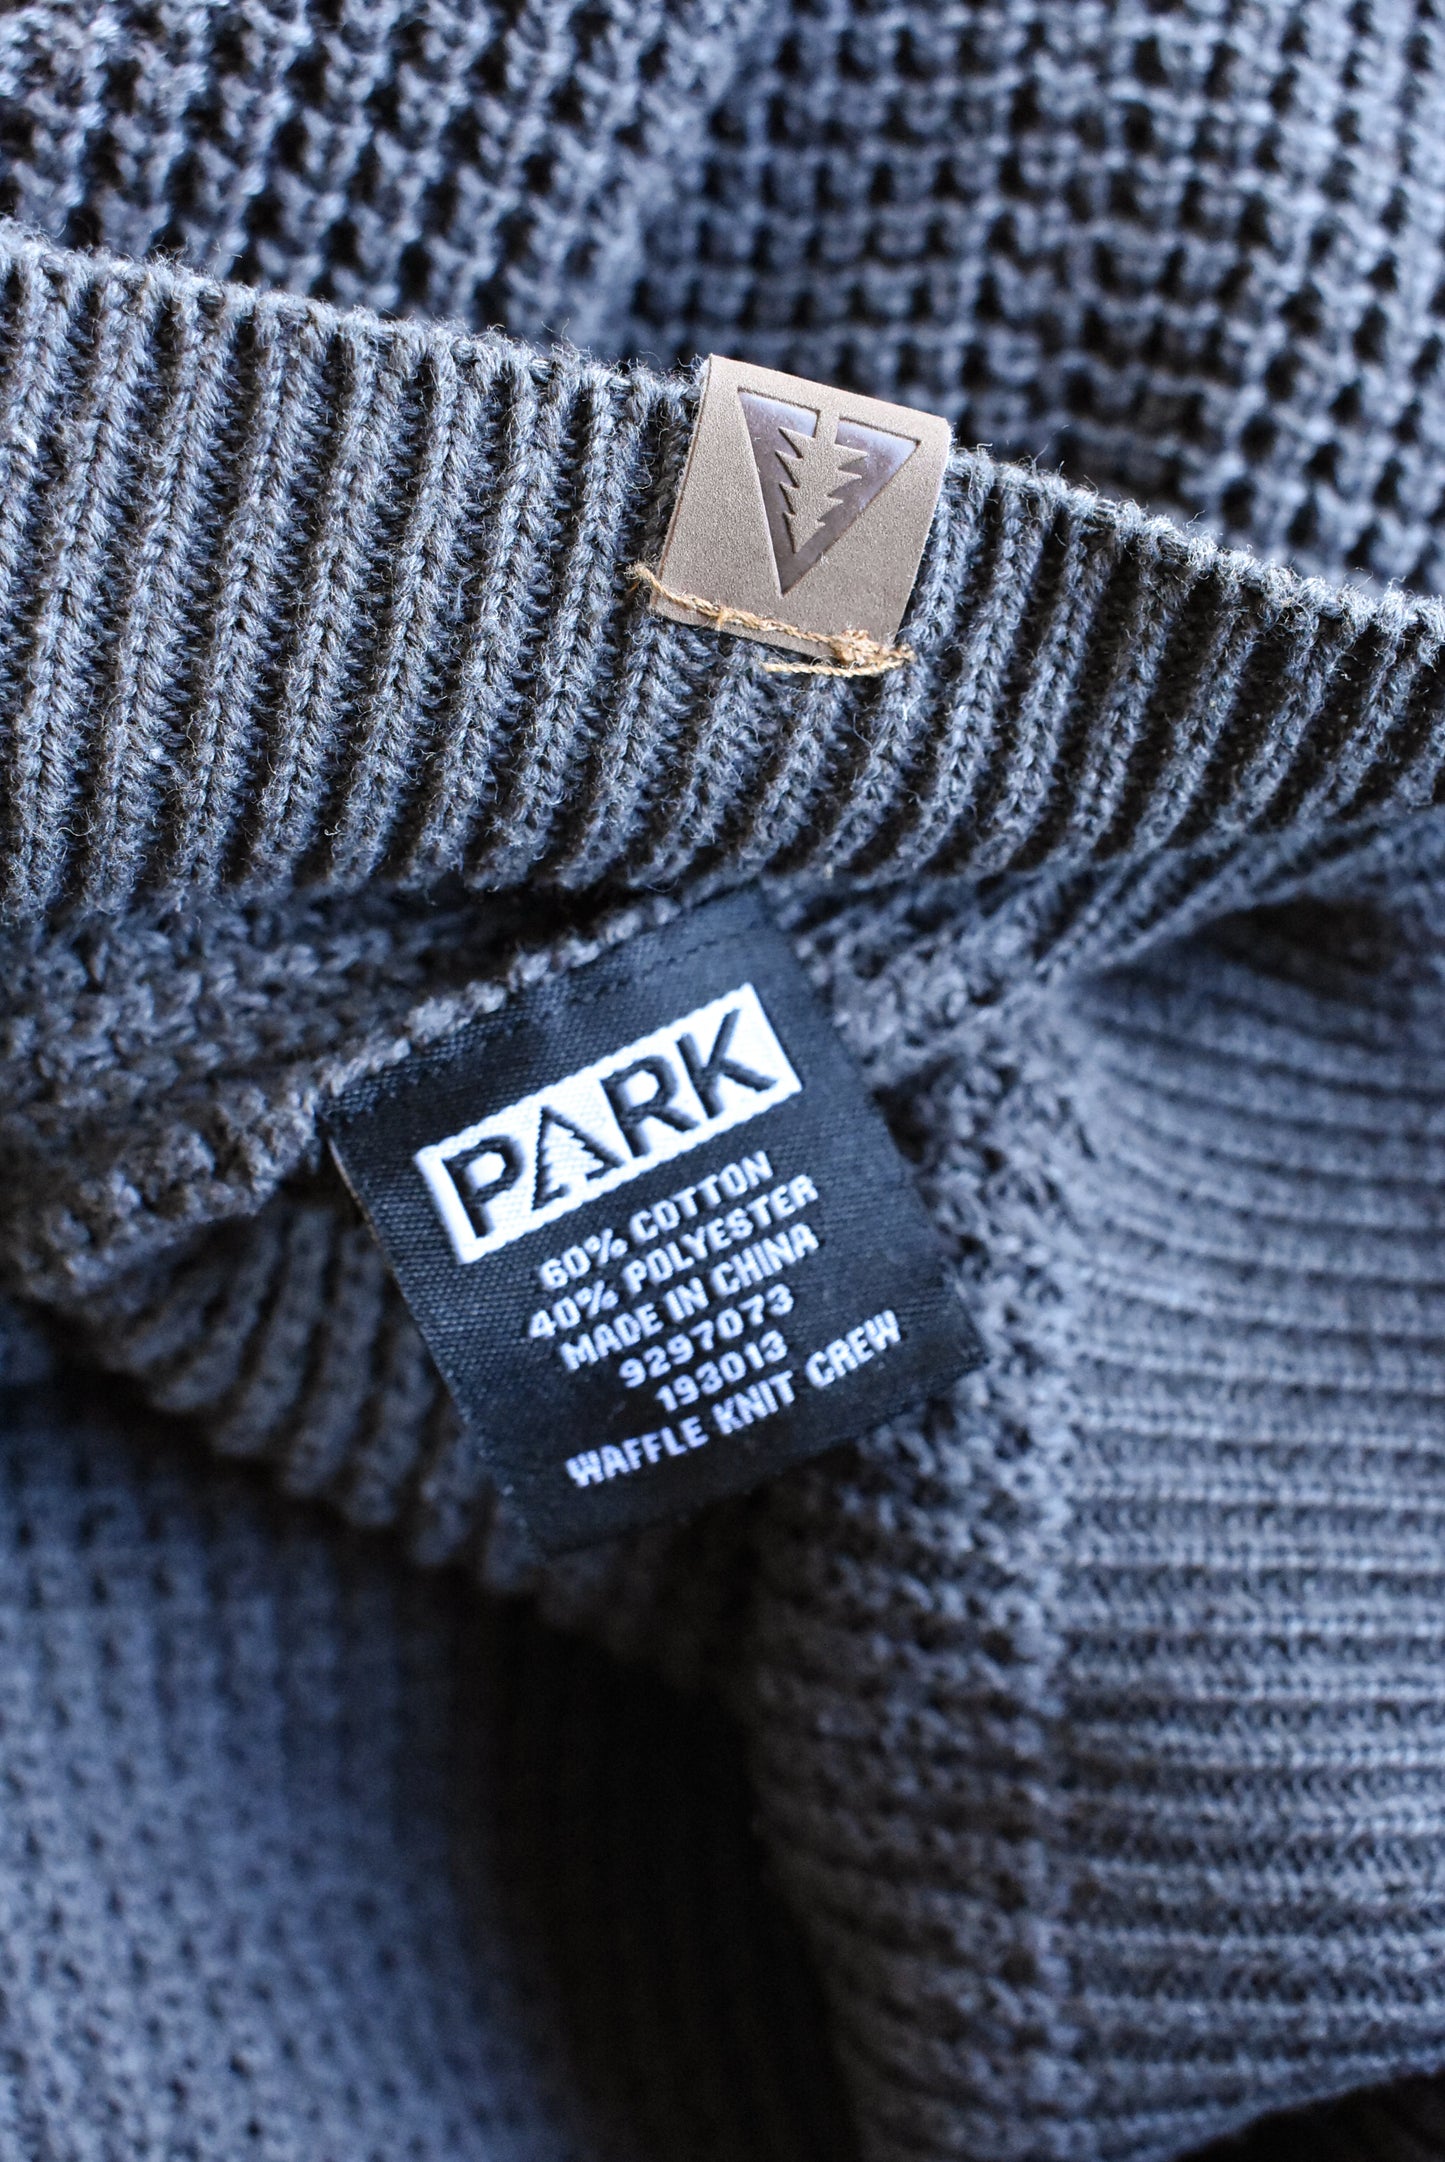 Park grey knitted jumper, size M